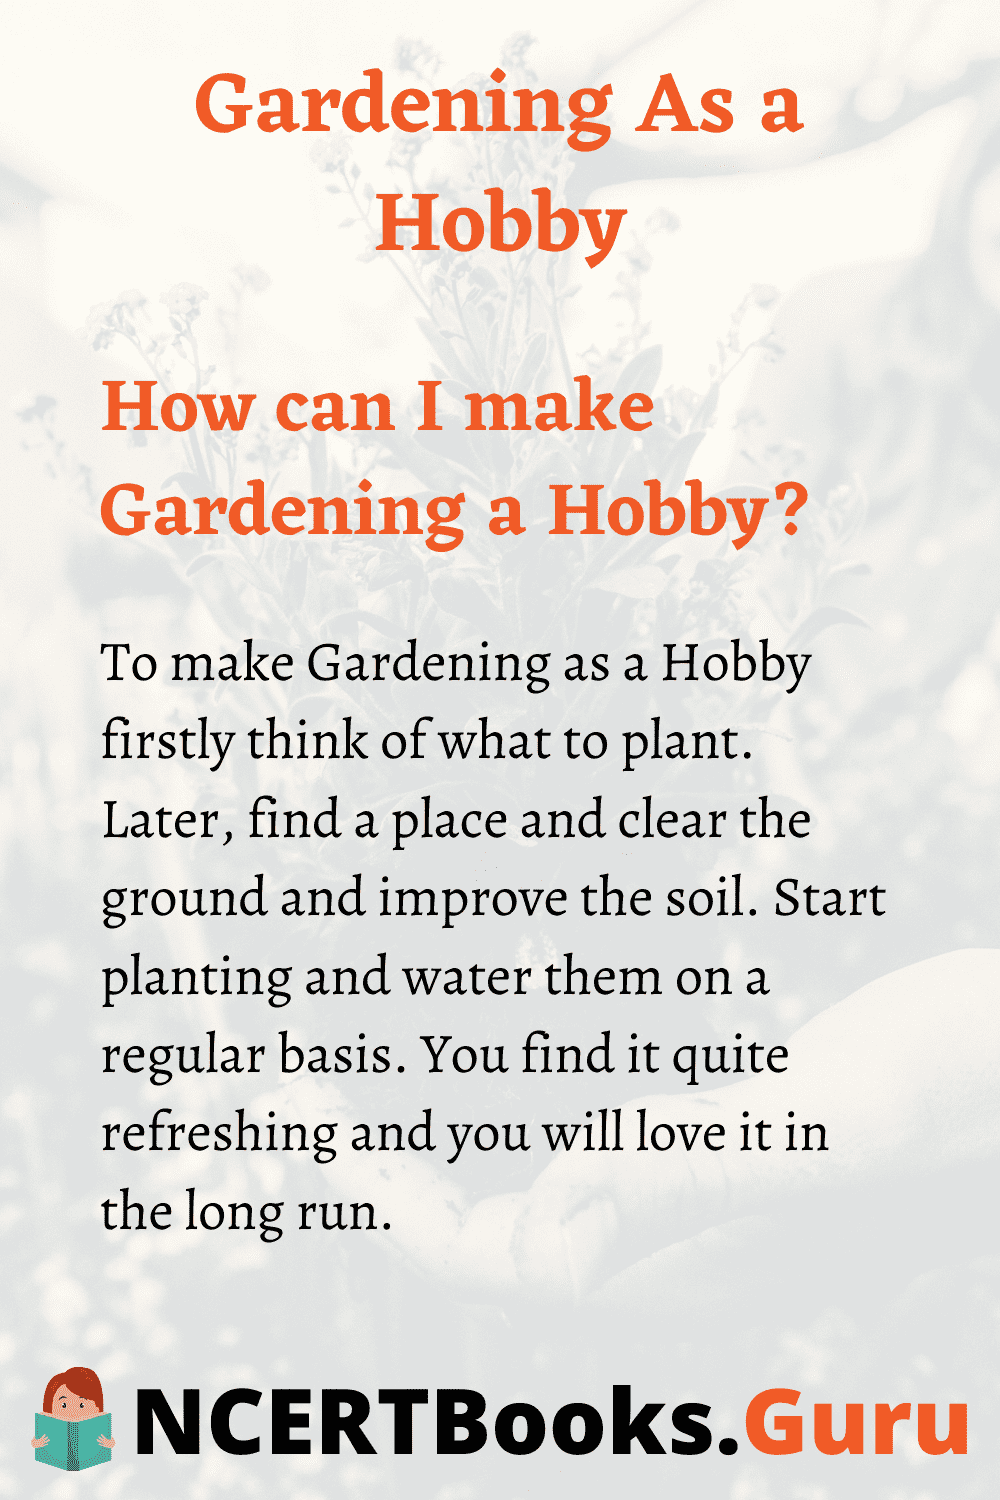 How to make Gardening as Hobby